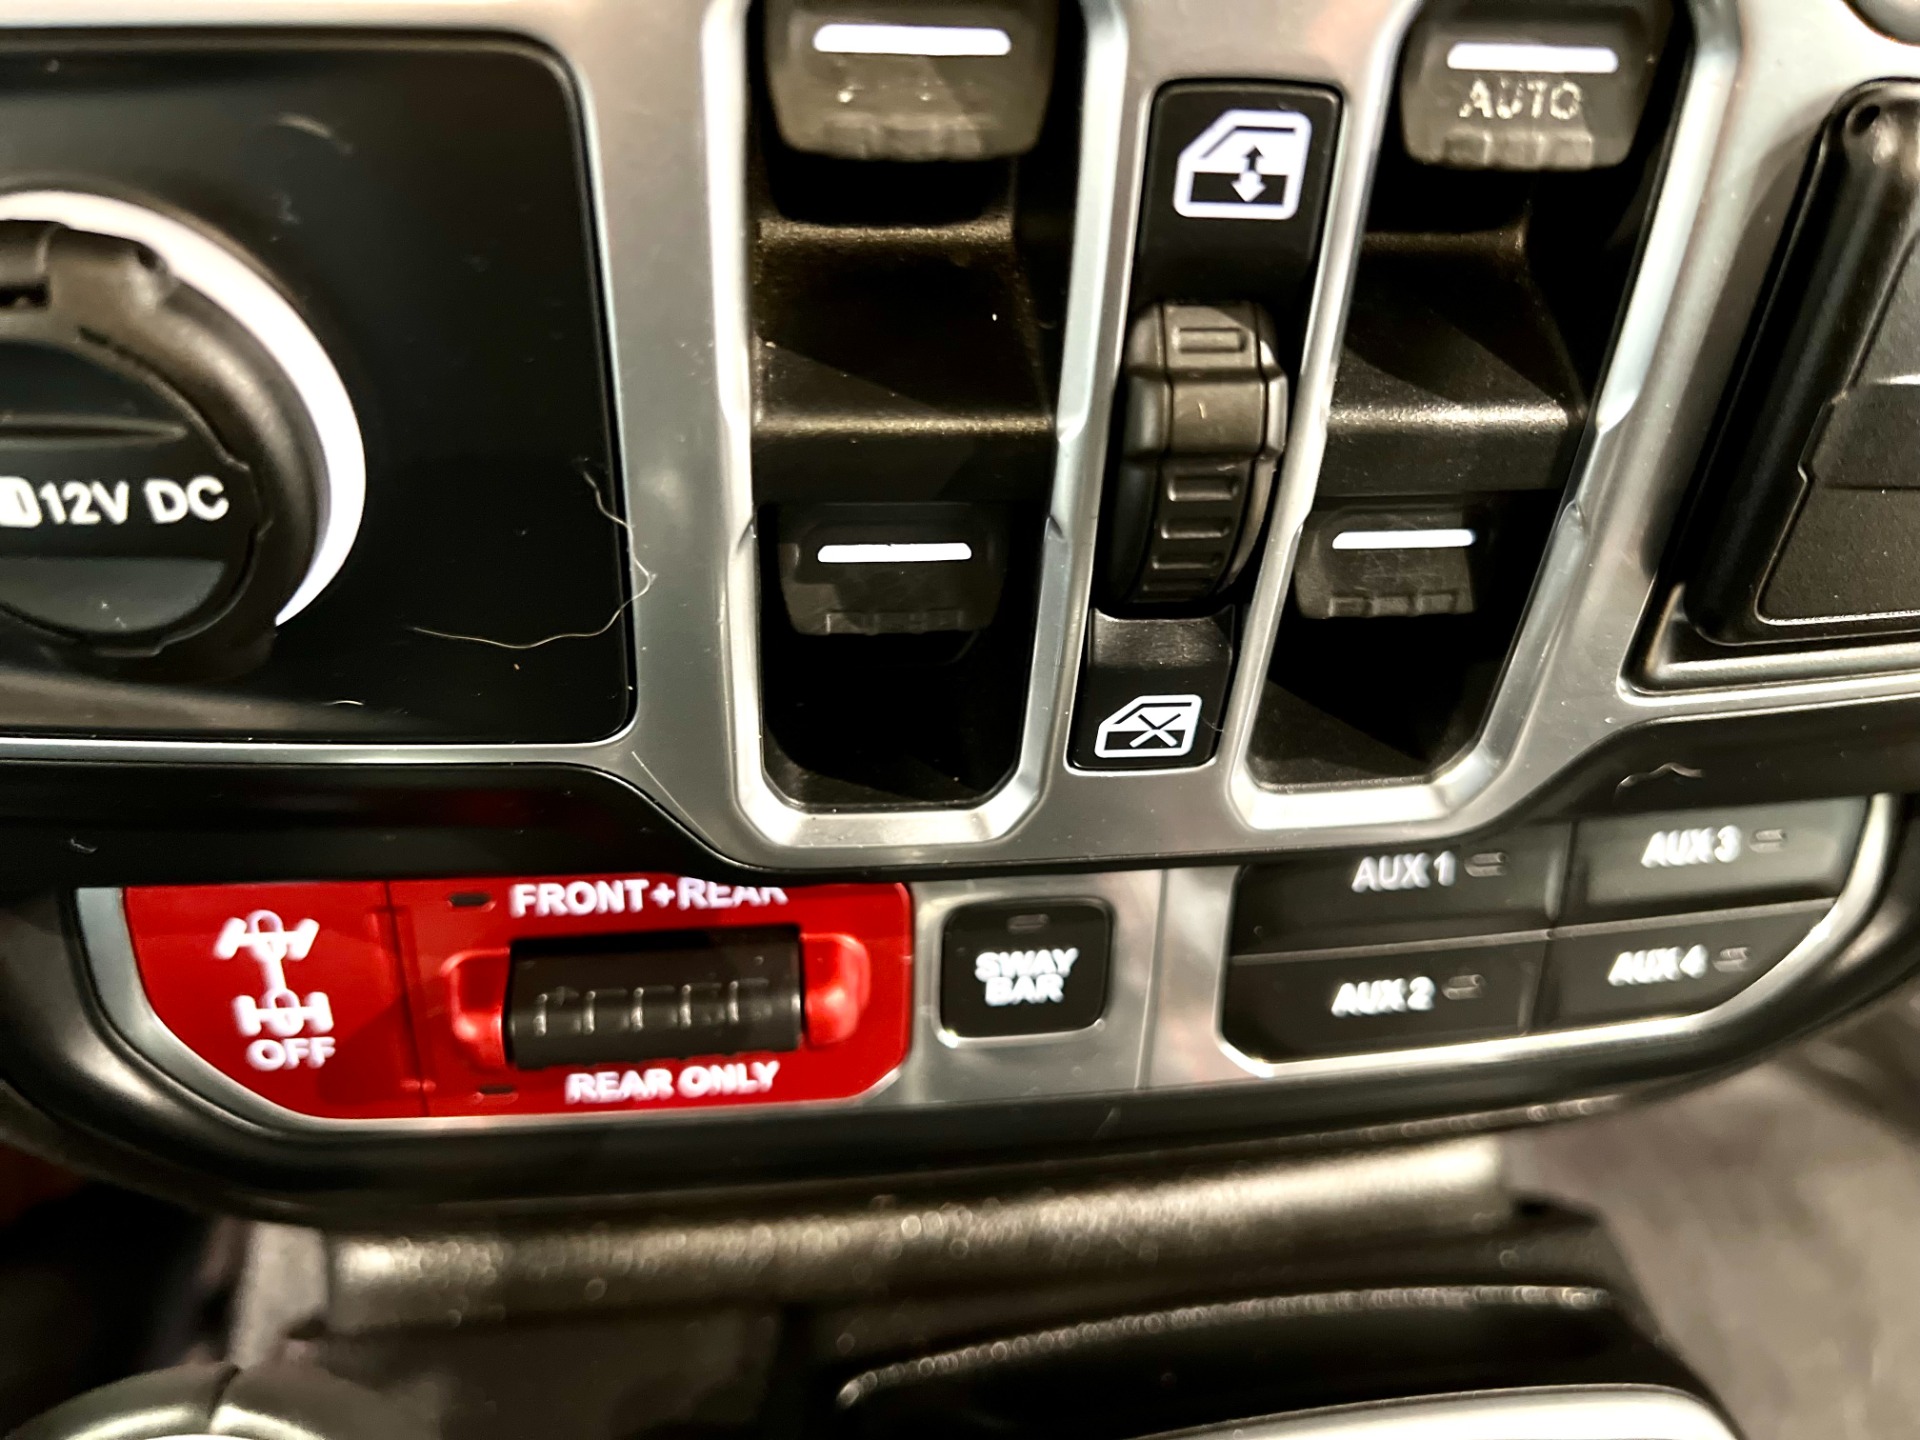 Used 2019 Jeep Wrangler Unlimited Rubicon